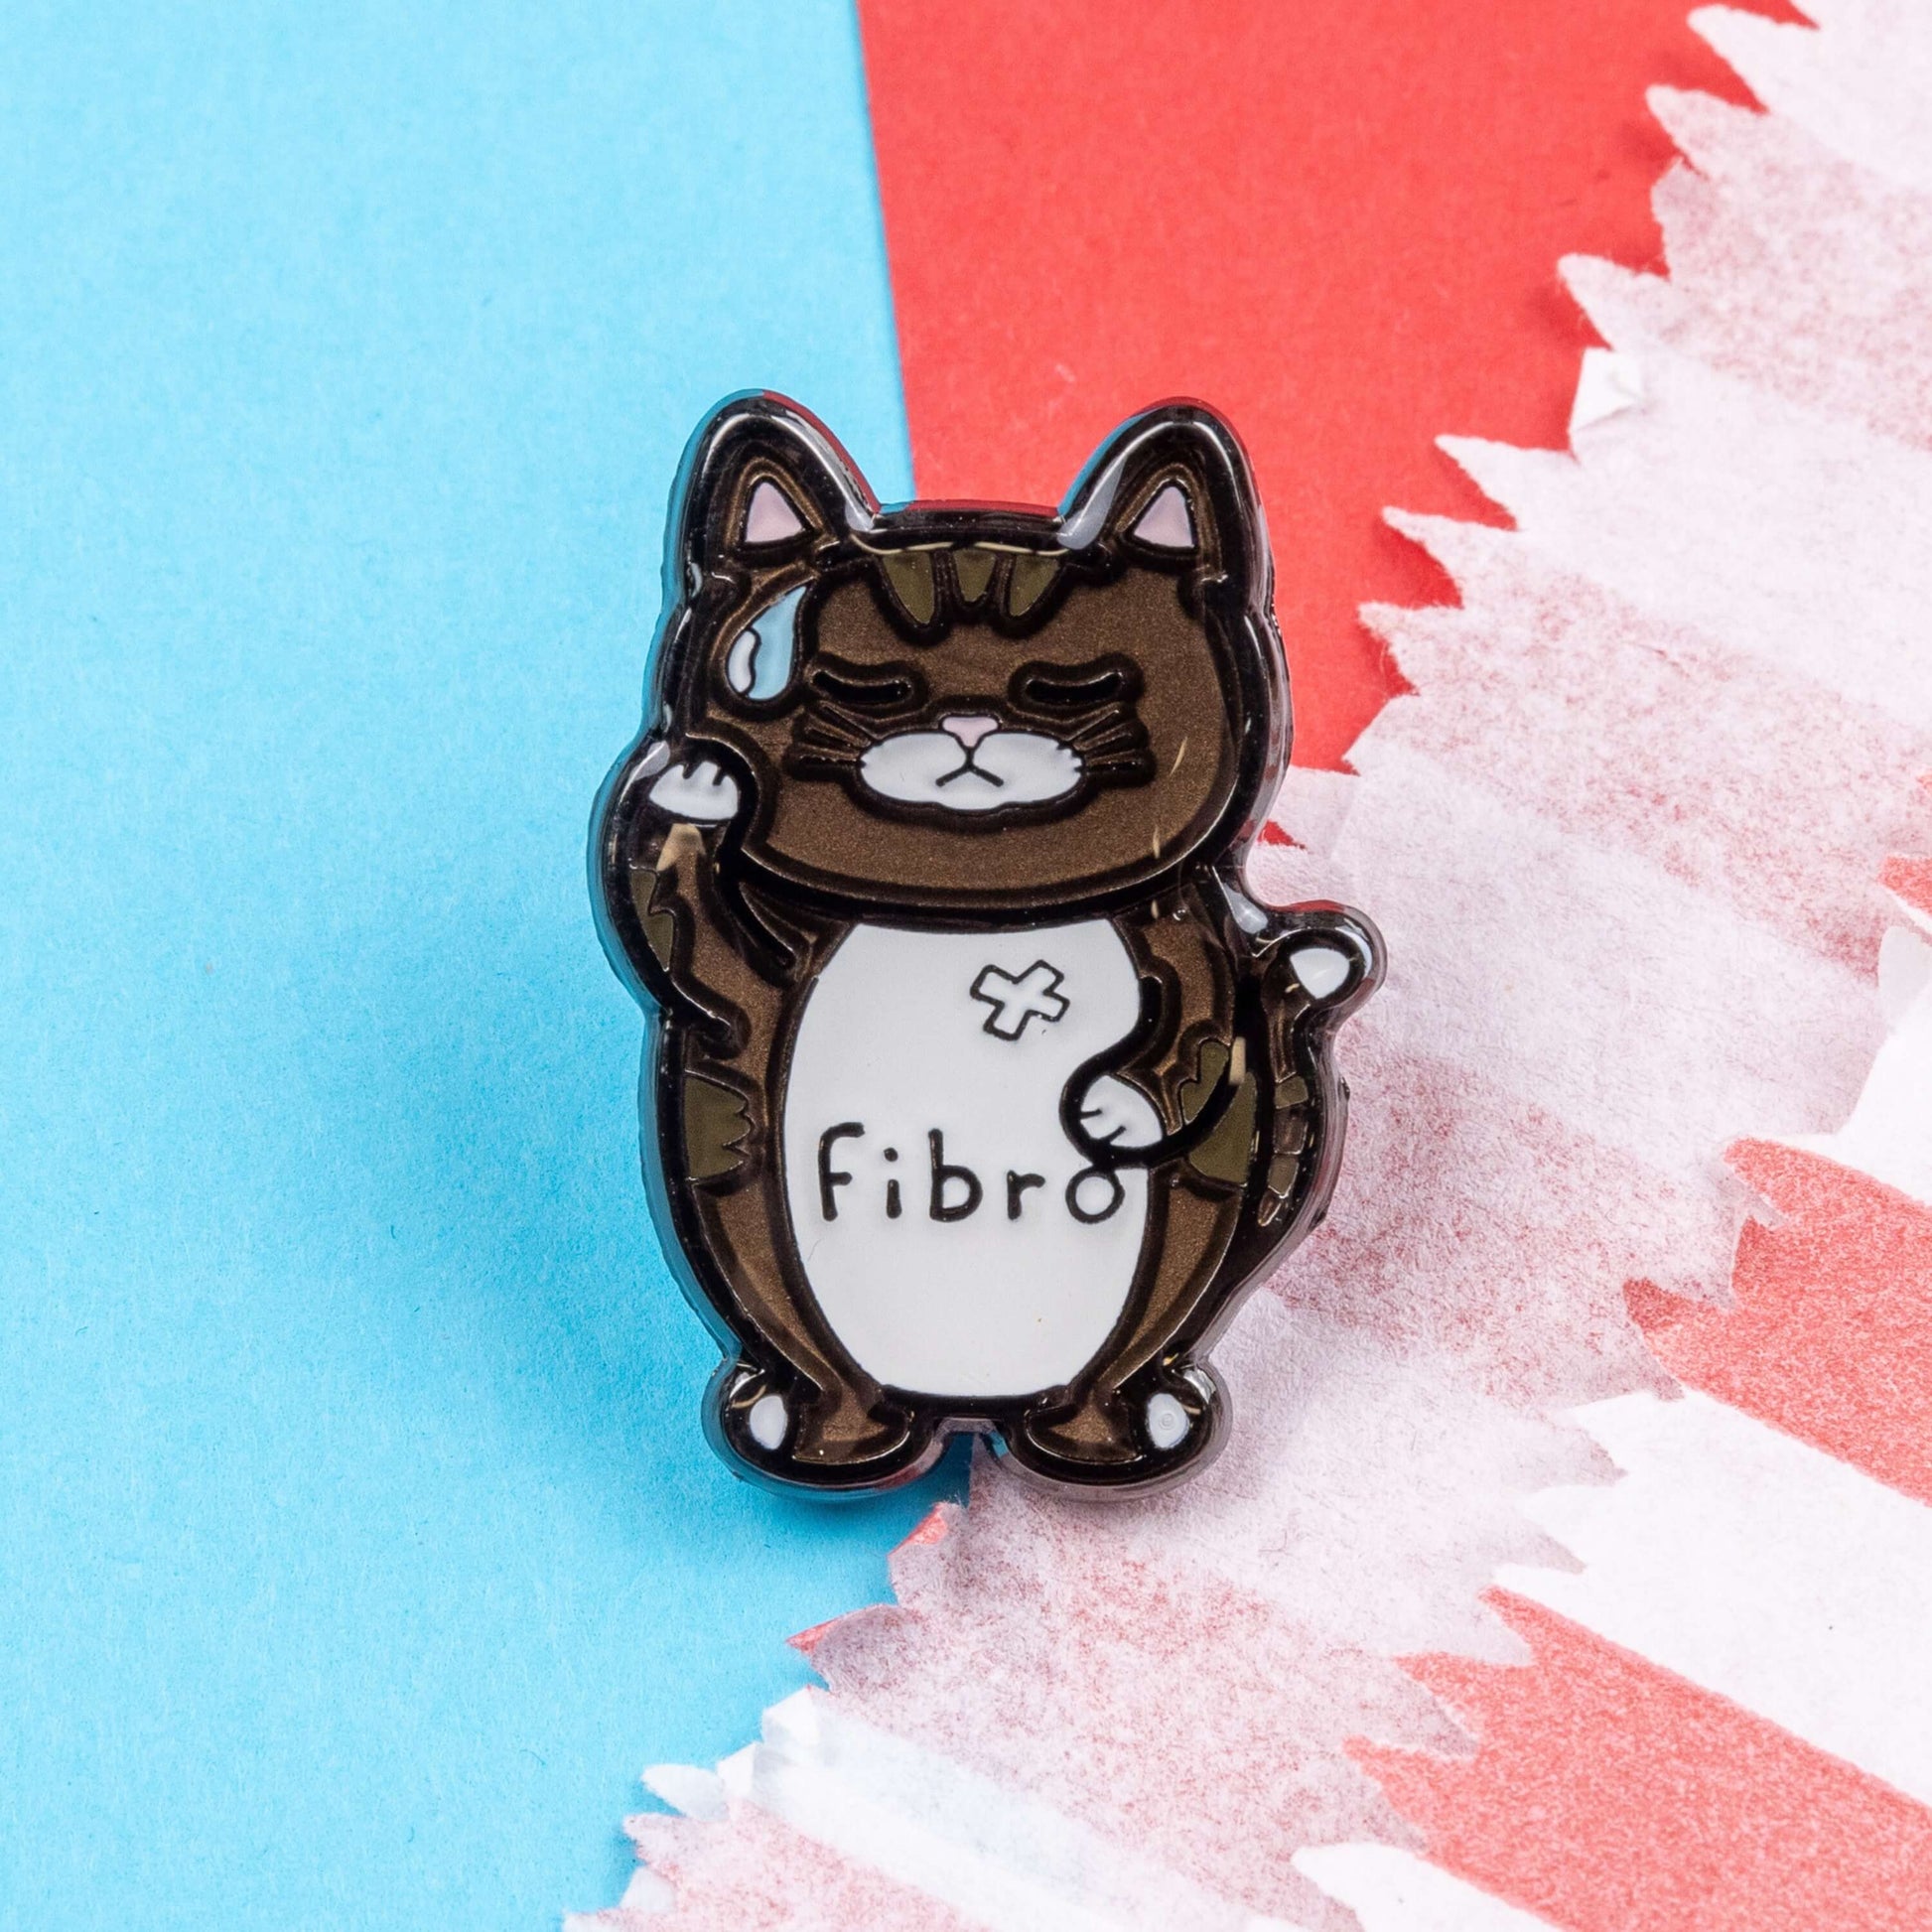 Fibromeowgia Enamel Pin - Fibromyalgia on a red and blue background. The enamel pin is a brown cat with a white stomach with fibro written across it. The cat has its eyes closed, a sweat droplet on its forehead and holding its head in its paw. The enamel pin is designed to raise awareness for fibromyalgia.